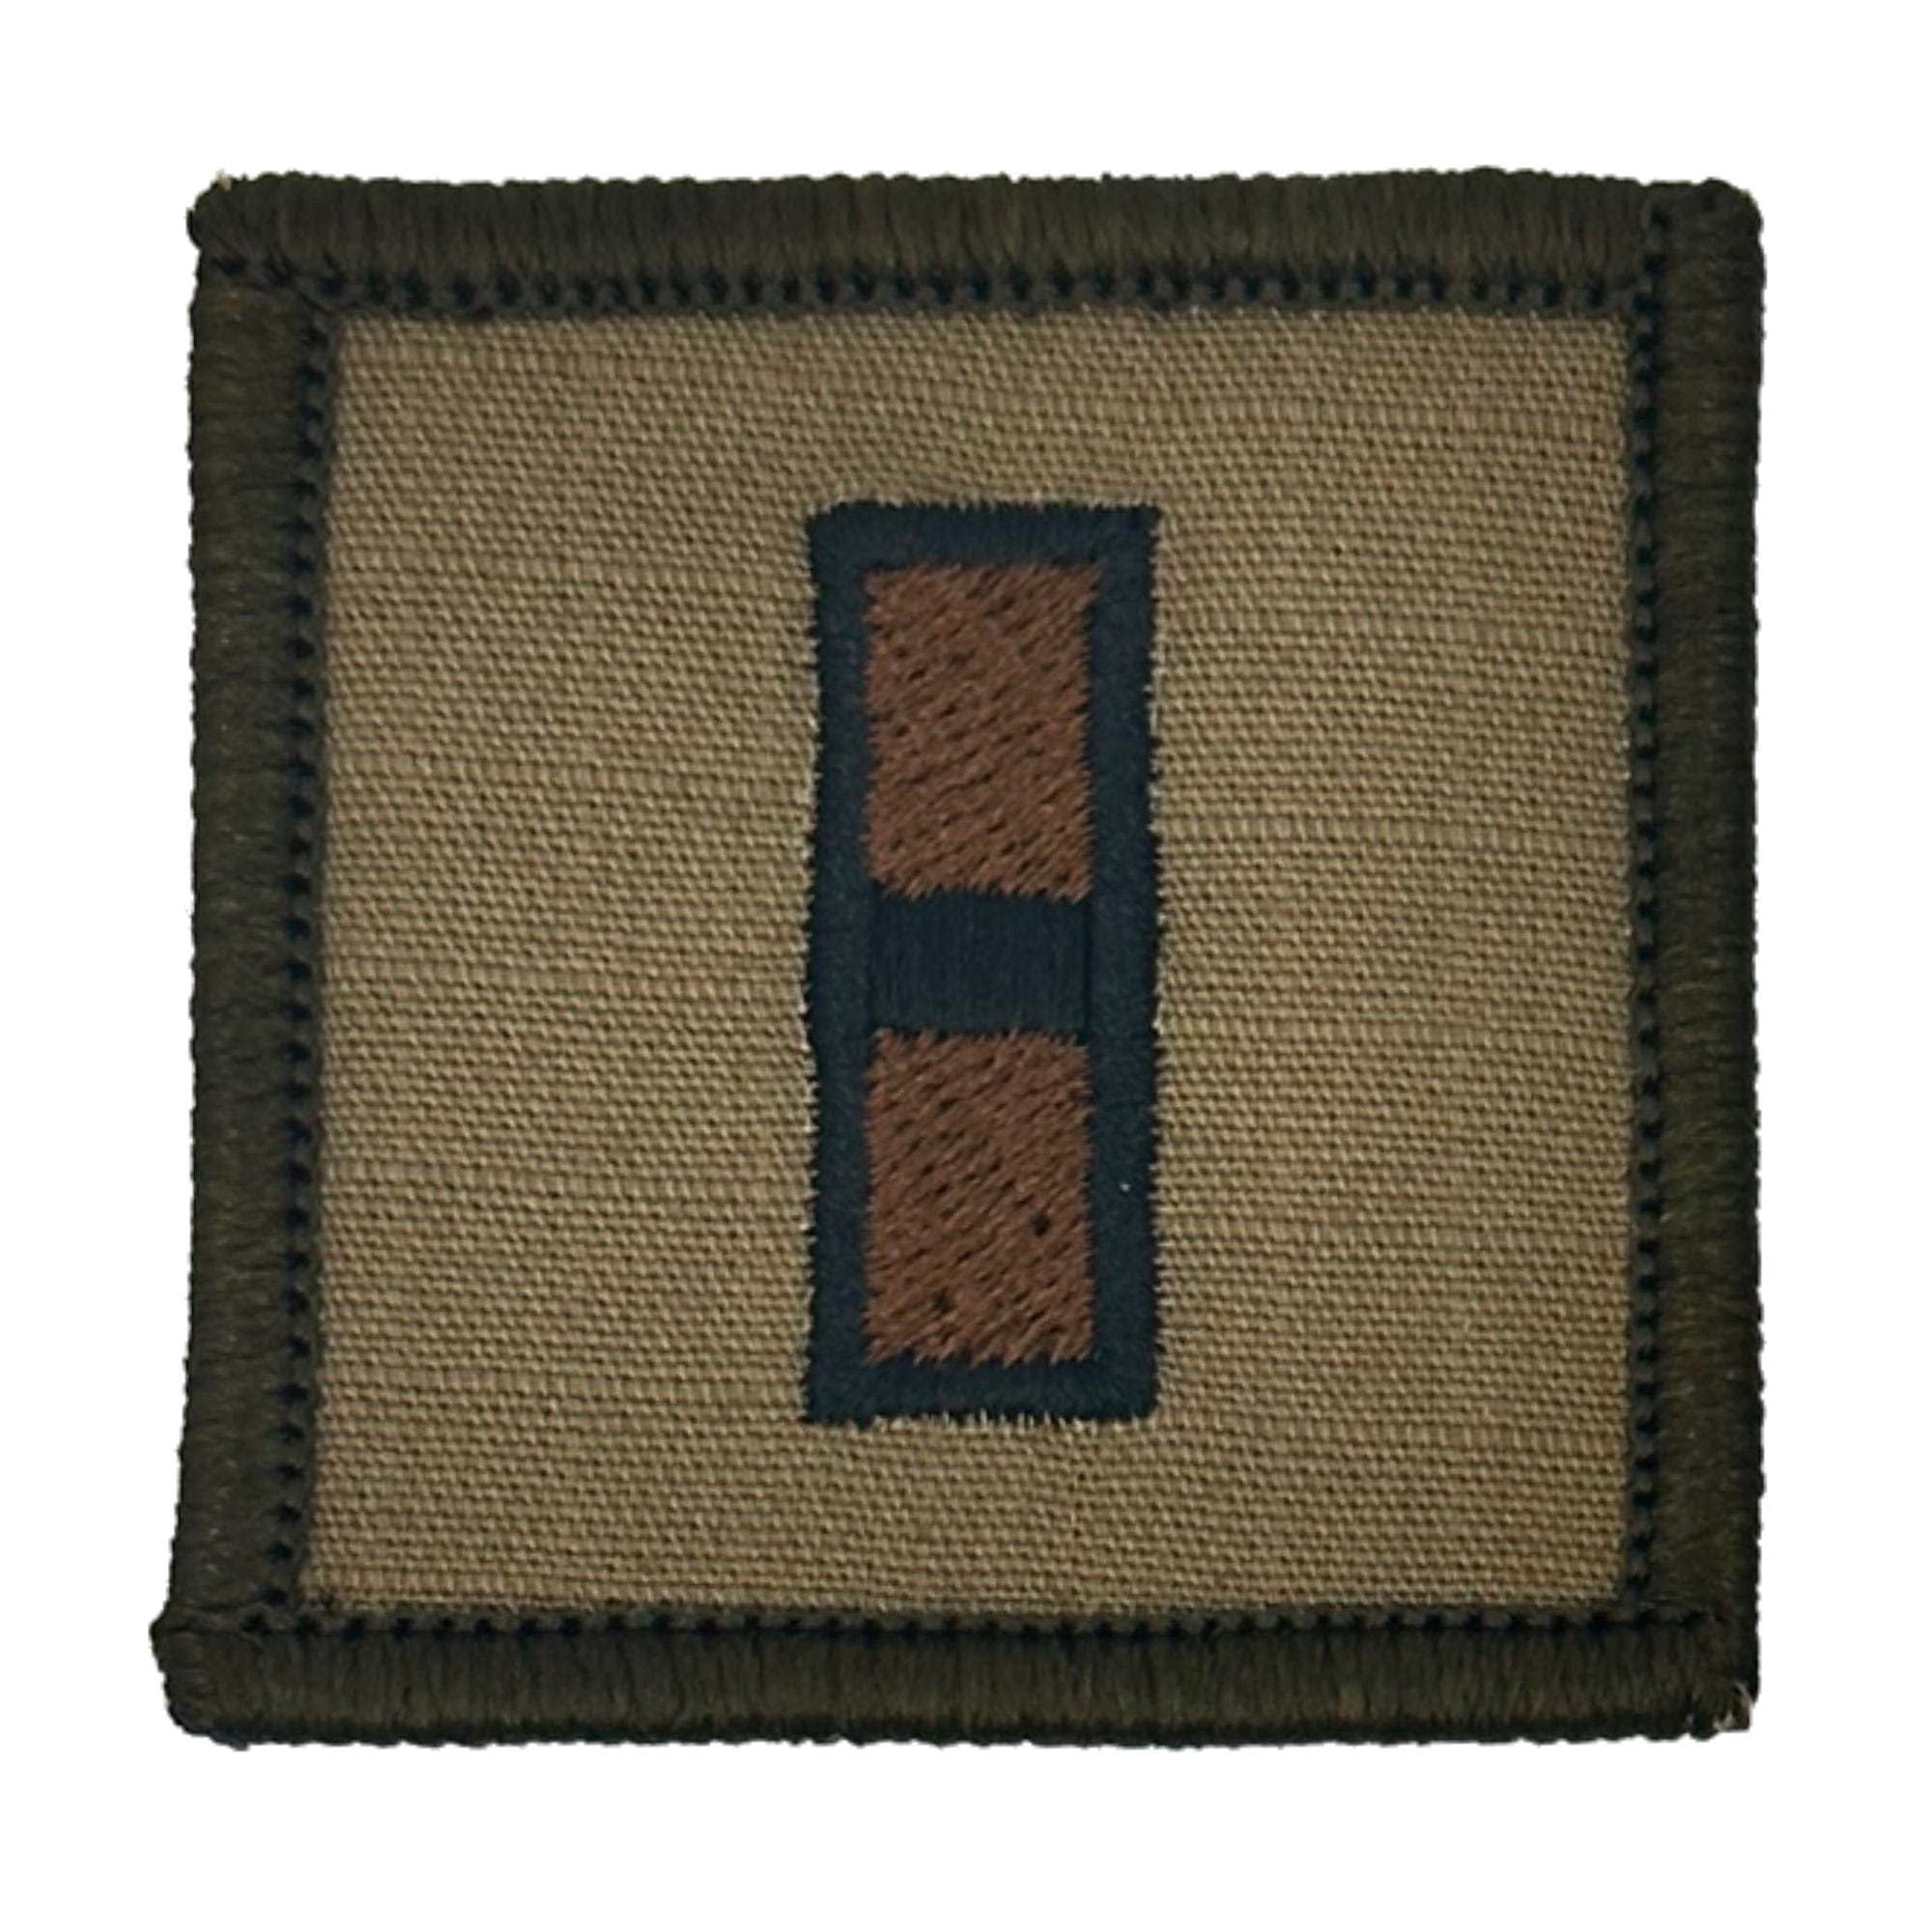 Tactical Gear Junkie Patches Coyote Brown / Warrant Officer USMC Rank Insignia - 2x2 Patch